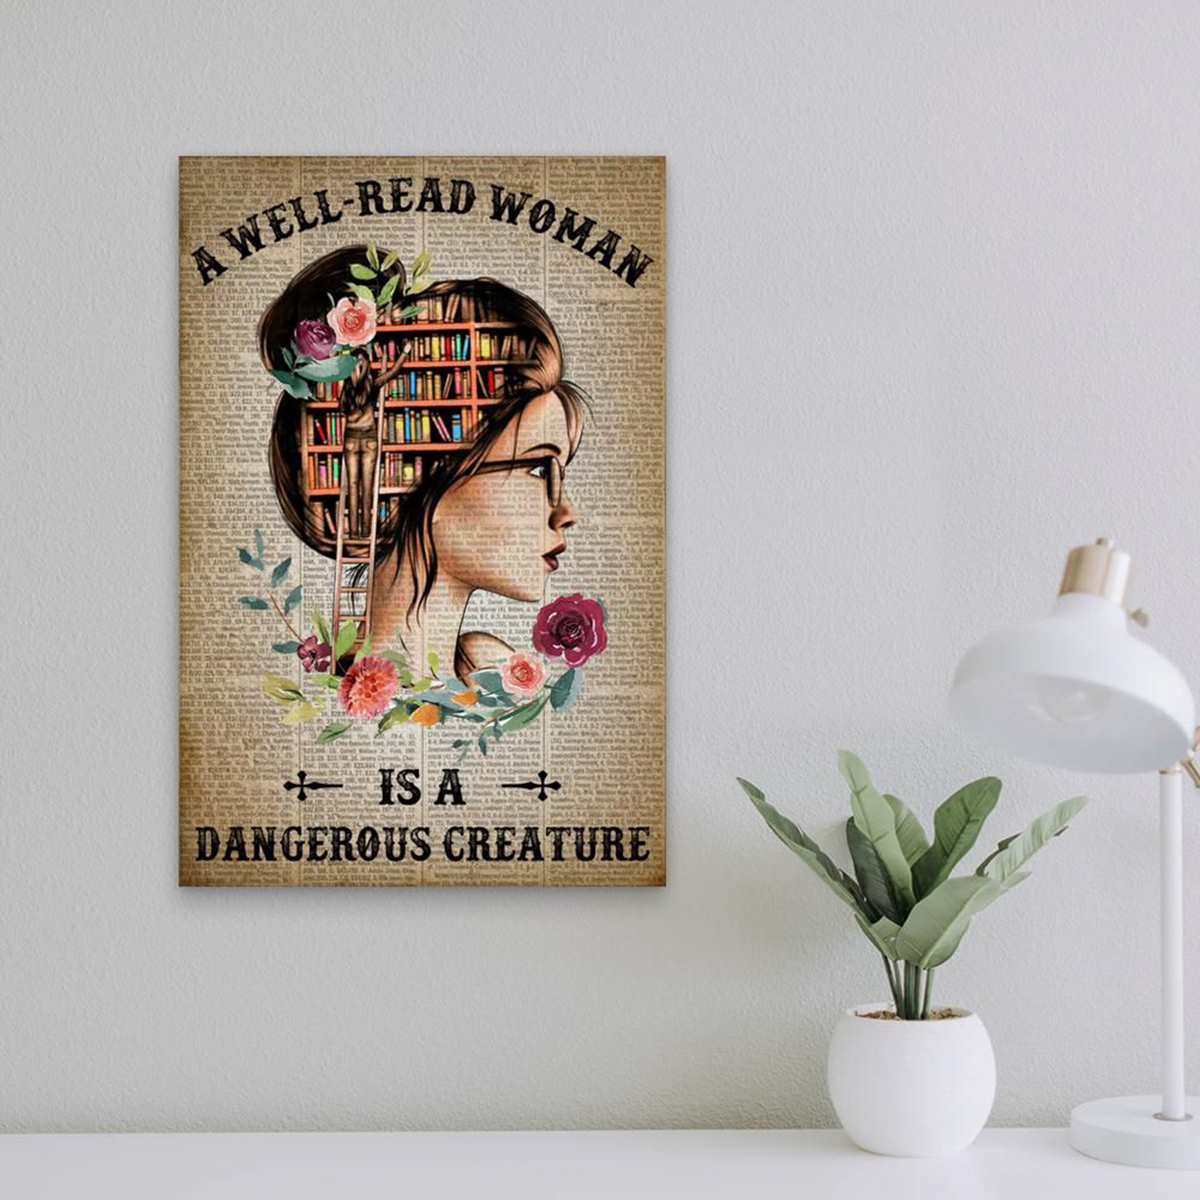 A well-read woman is a dangerous creature poster